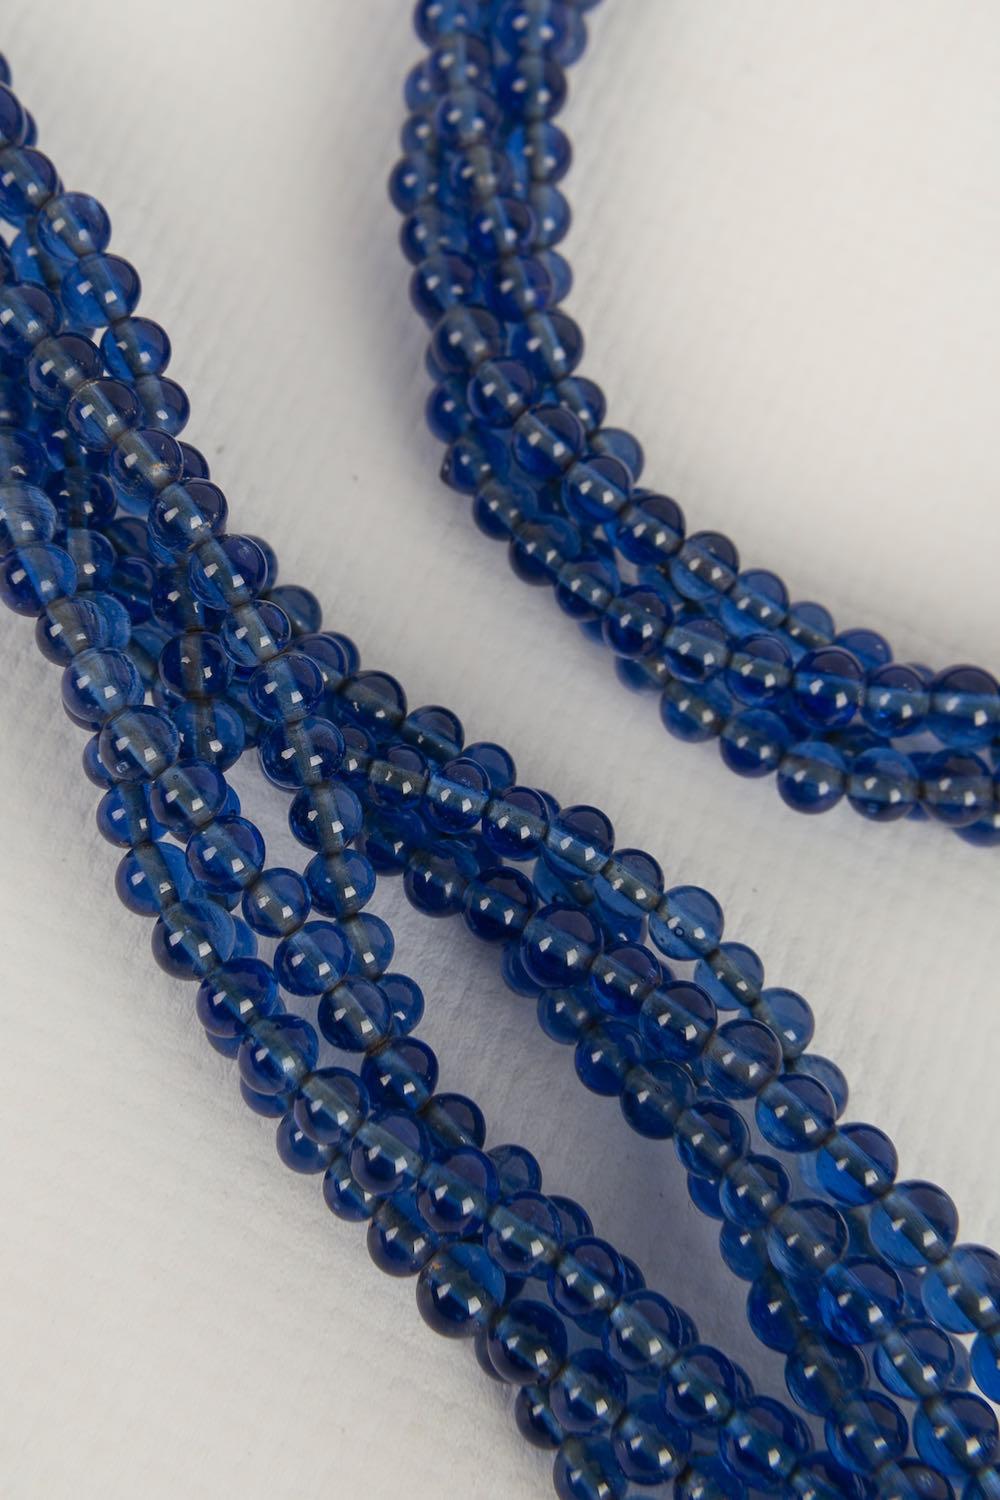 Women's Vintage Blue Glass Beads Necklace